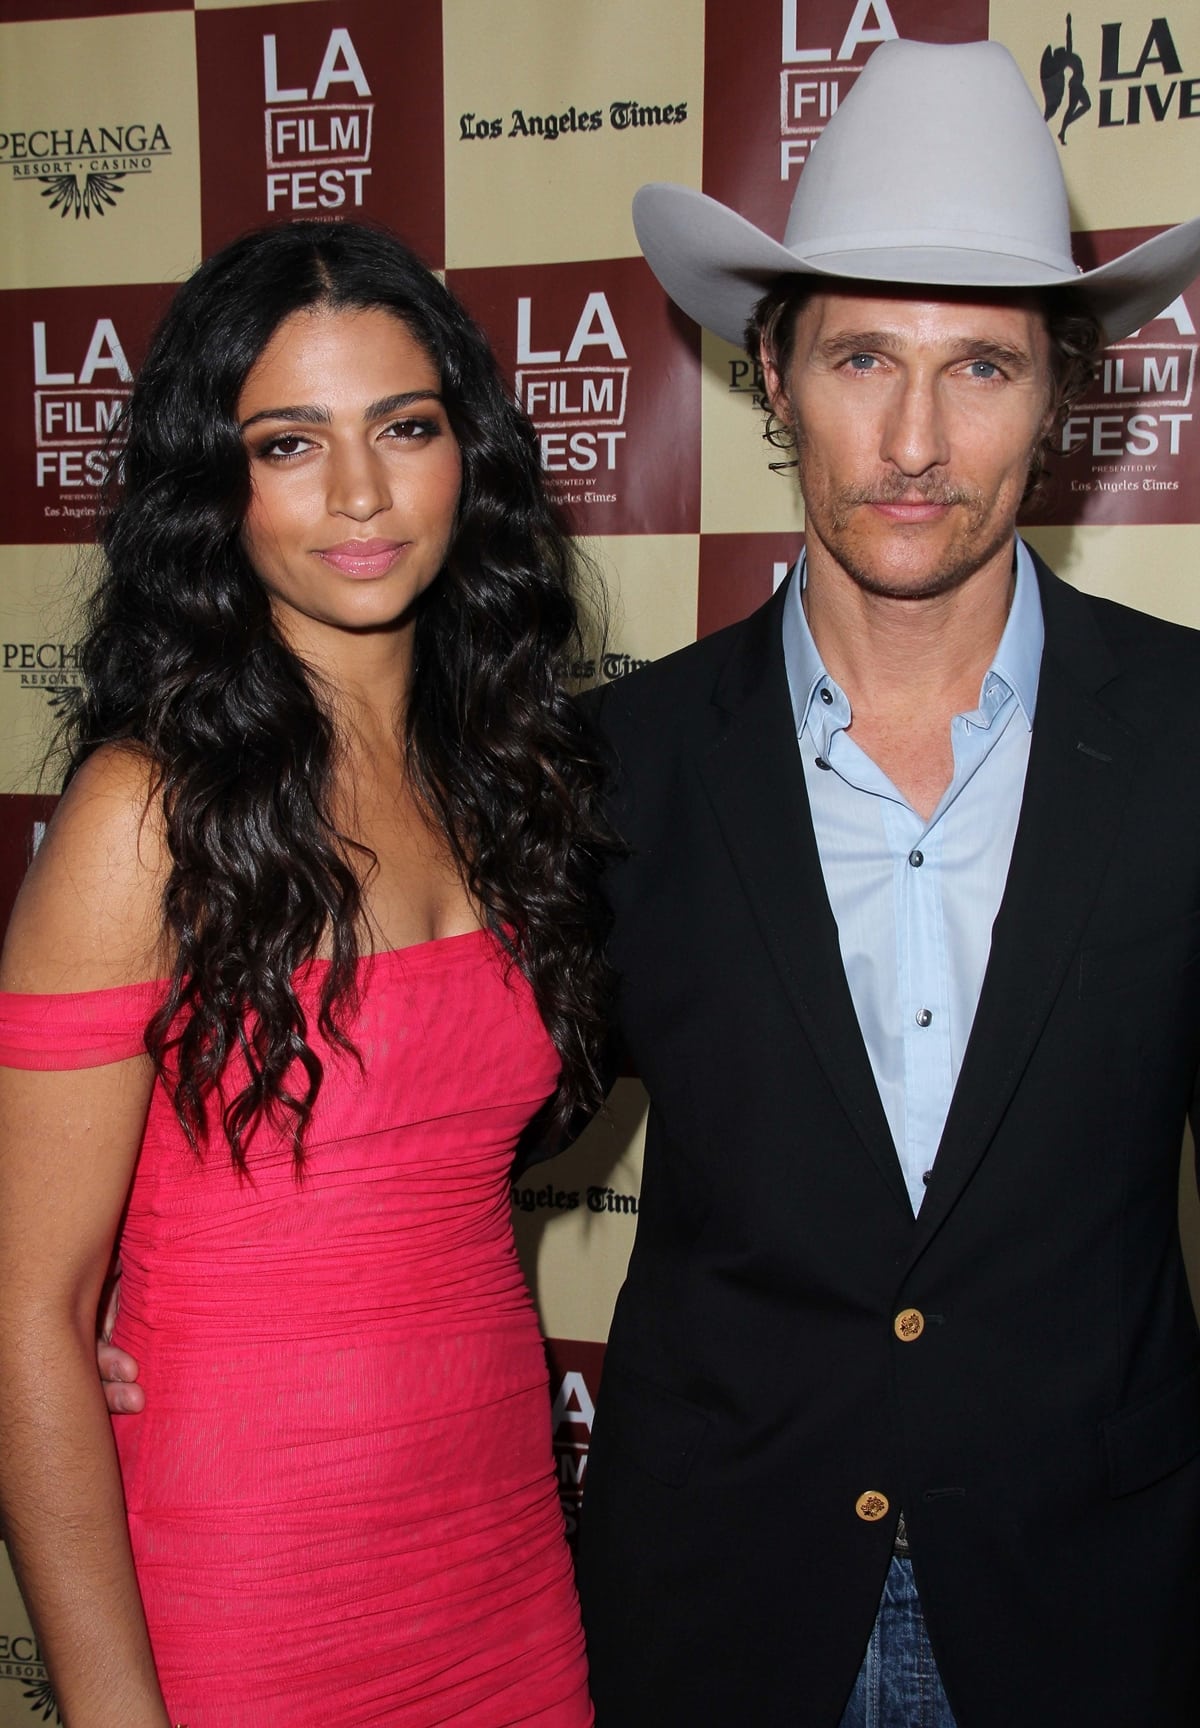 Camila Alves and Matthew McConaughey met at a club on Sunset Boulevard in 2006